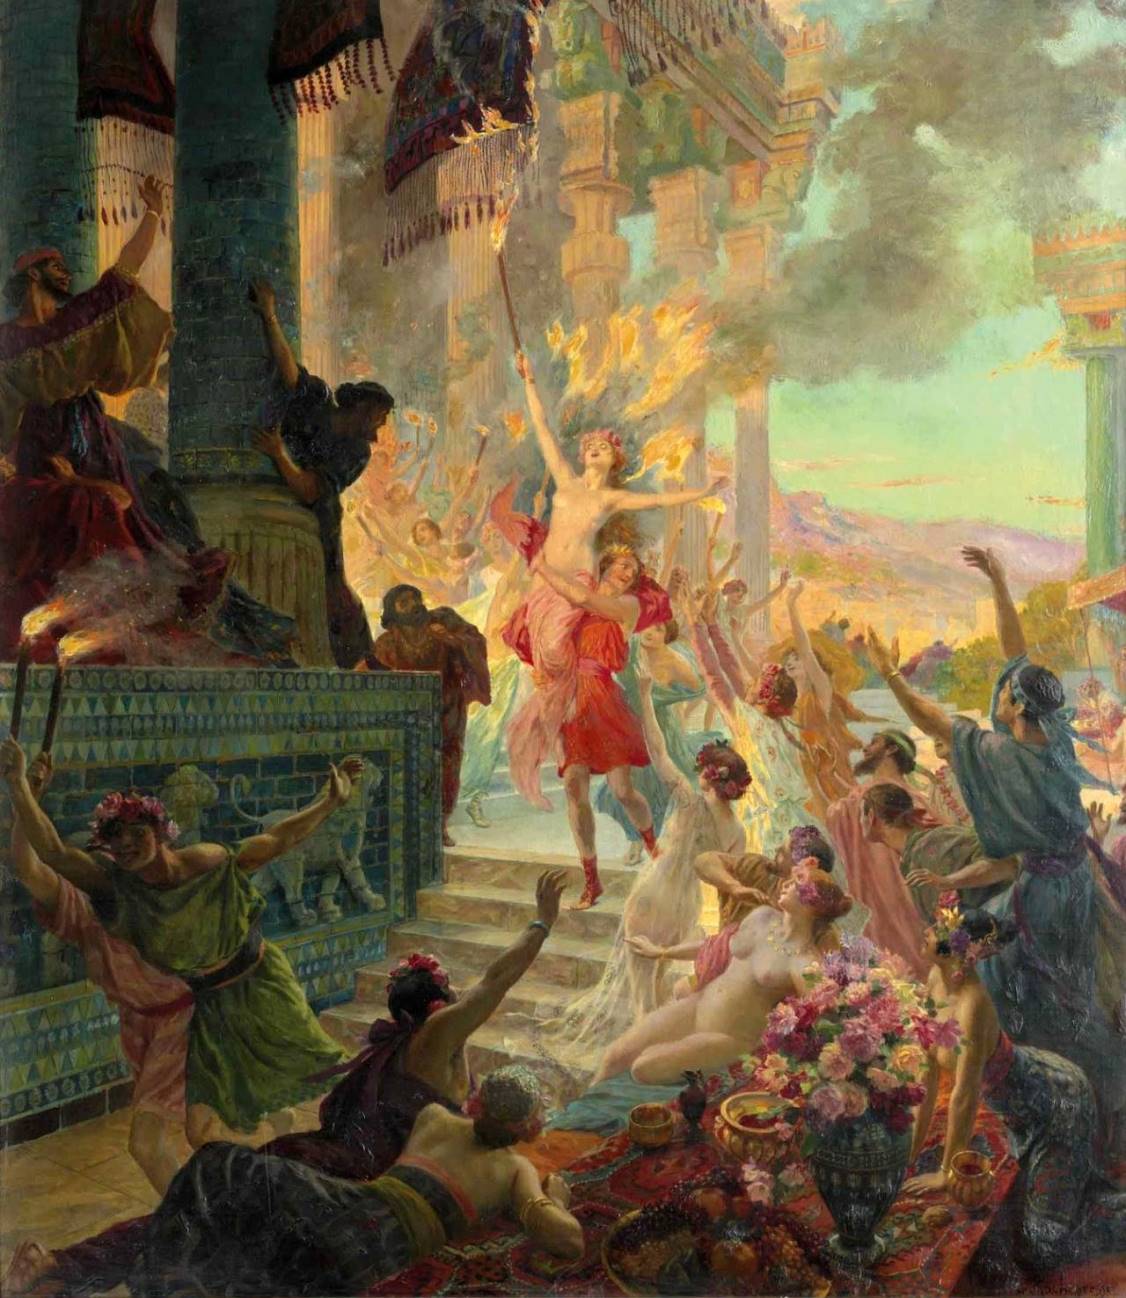 Painting with a man holding up an almost naked women who is brandishing a blazing torch. In the background columns ablaze; in the foreground agitated figures